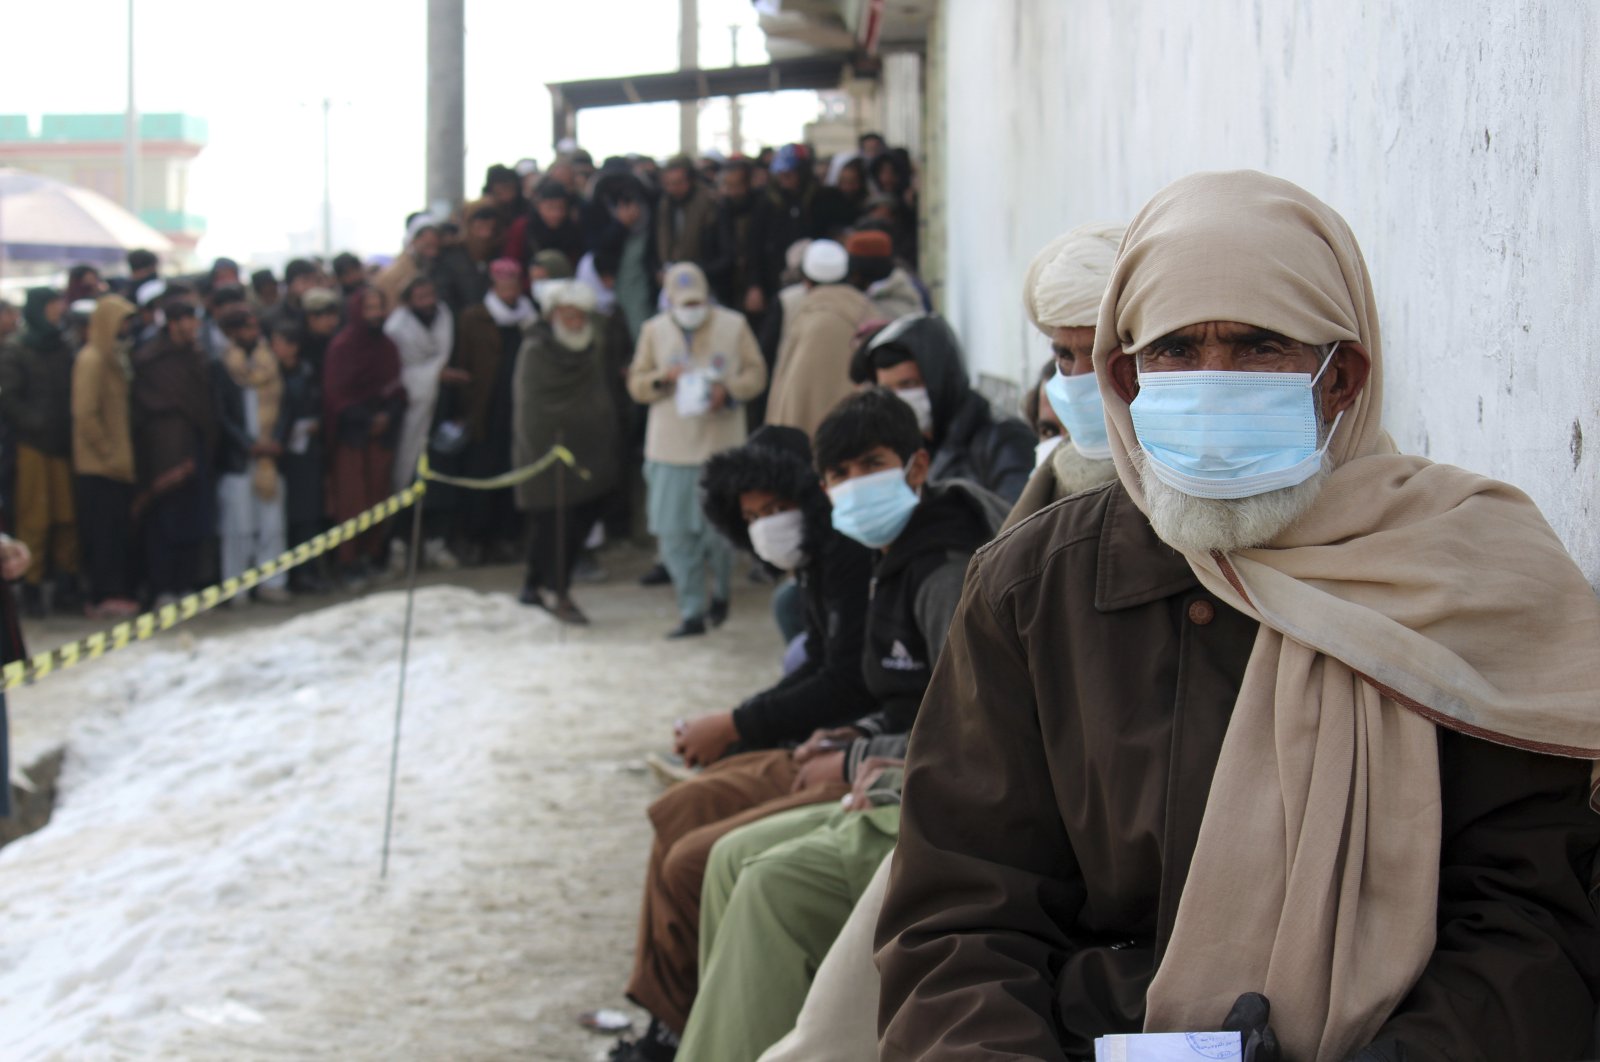 Afghans wait to receive food rations organized by the World Food Programme (WFP) in Pul-e-Alam, the capital of Logar province, eastern of Afghanistan, Jan. 18, 2022. (AP Photo)